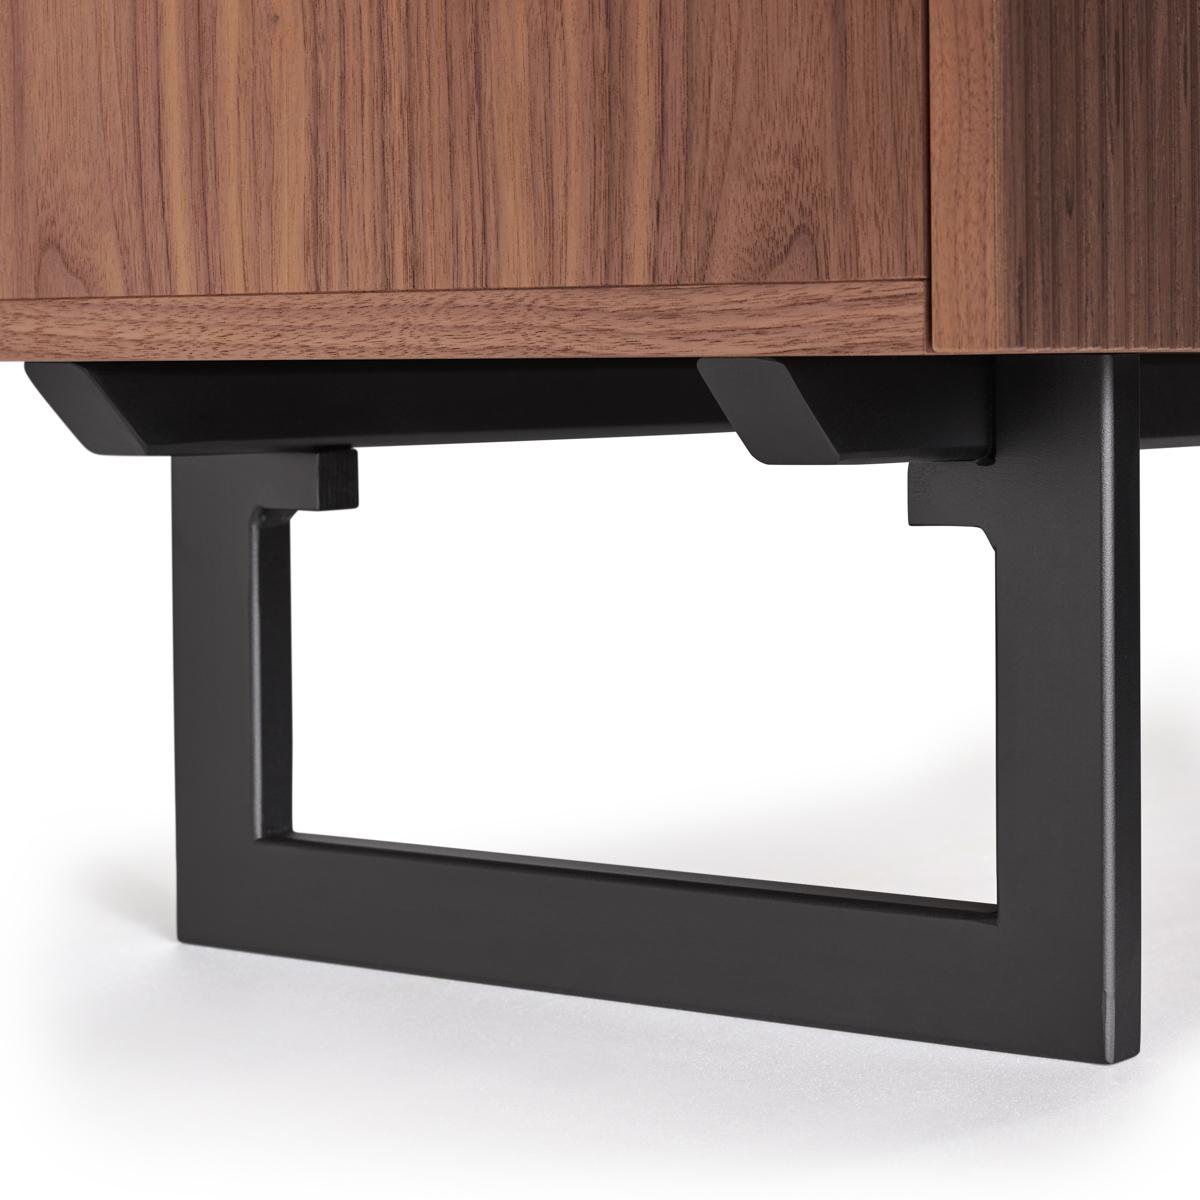 Woodwork 2-drawer coffee table in walnut & black iron feet, design by Christophe Lecomte For Sale